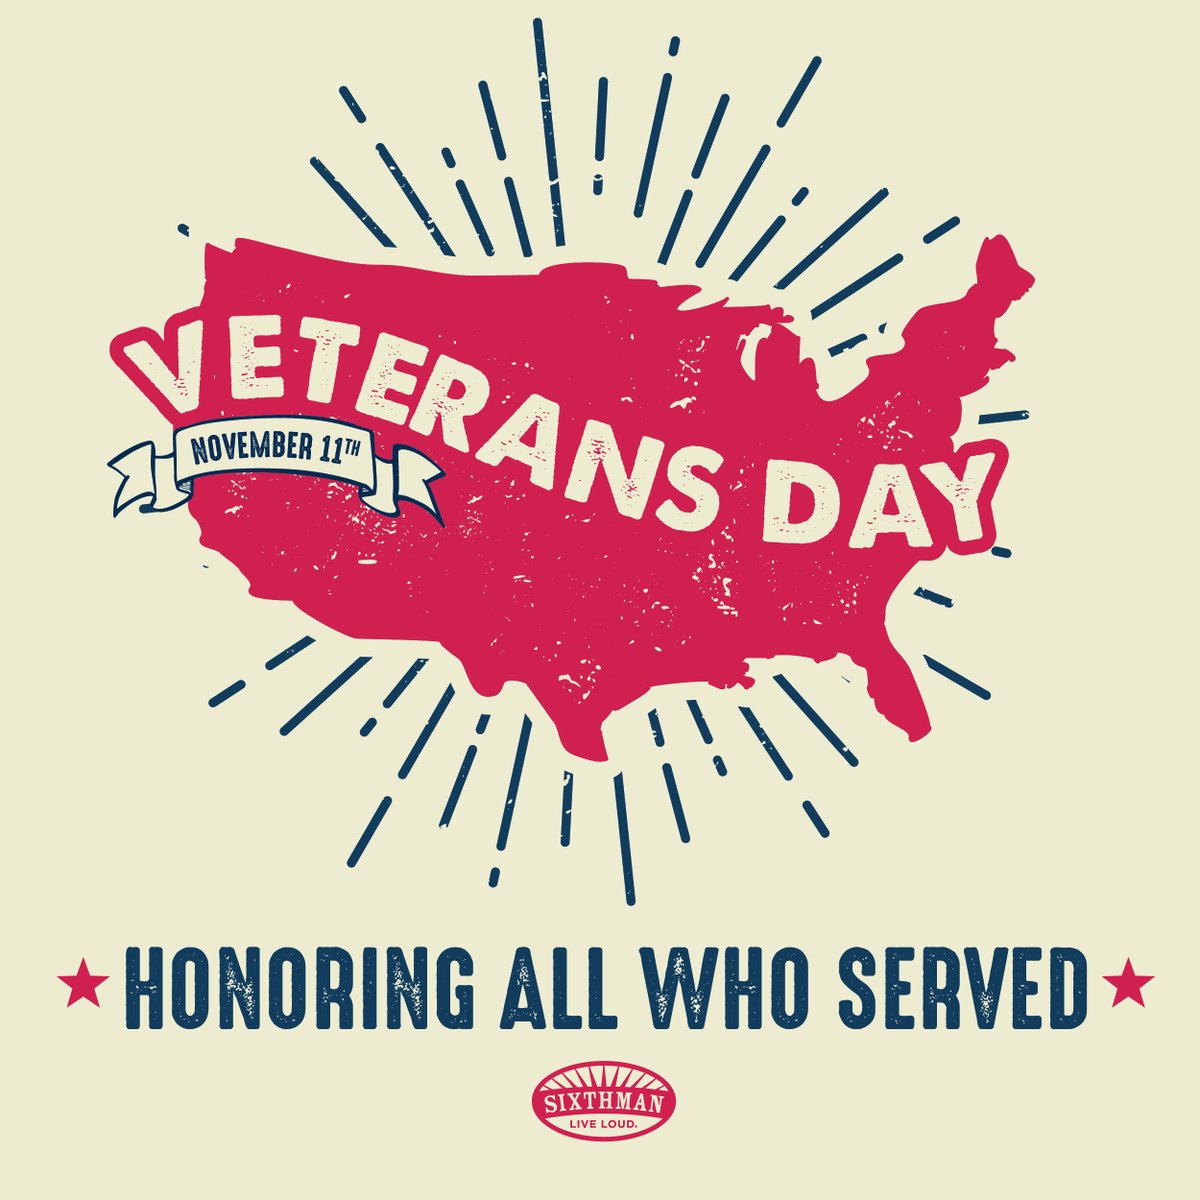 Happy Veterans Day! Sixthman thanks our service members for their commitment and bravery. Don't forget about our military discount when booking your next vacation with us - visit, sixthman.net/assurance for more details!